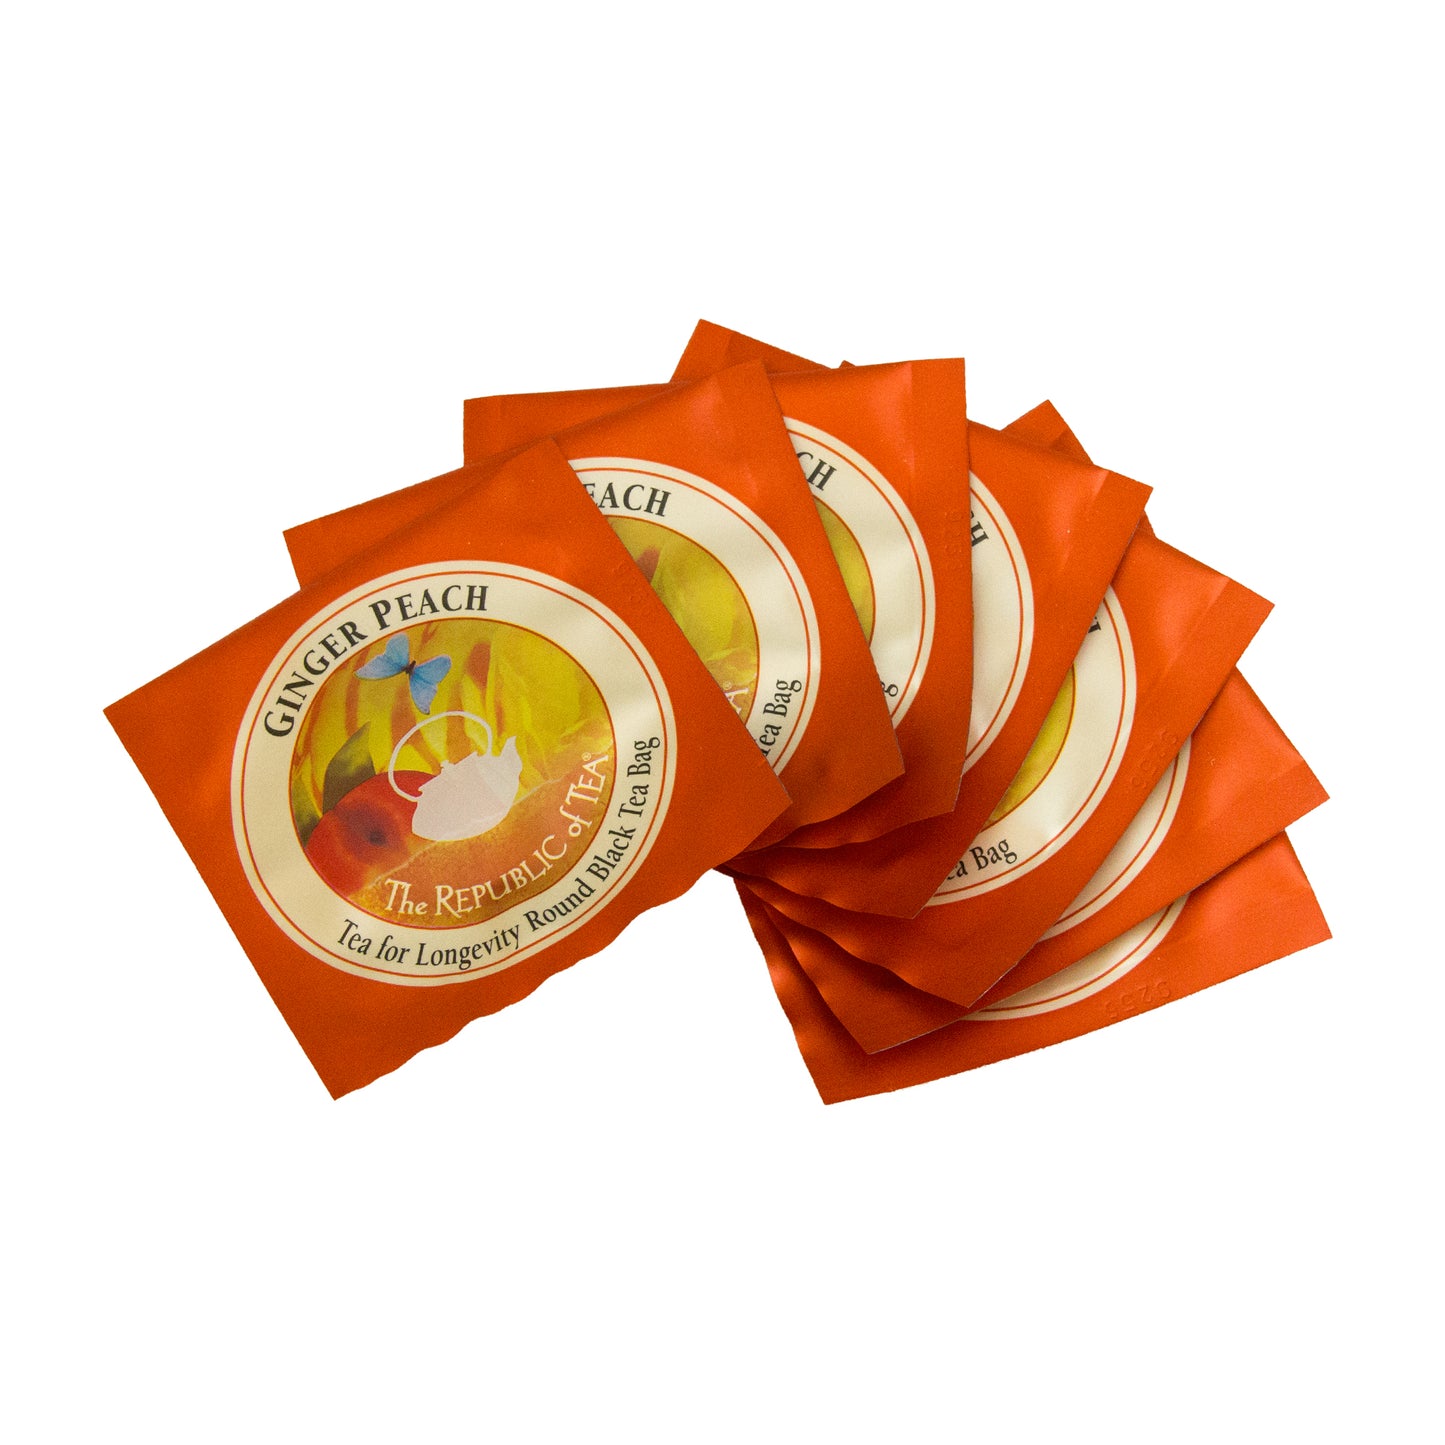 individual packets of ginger peach black tea scattered on a white background